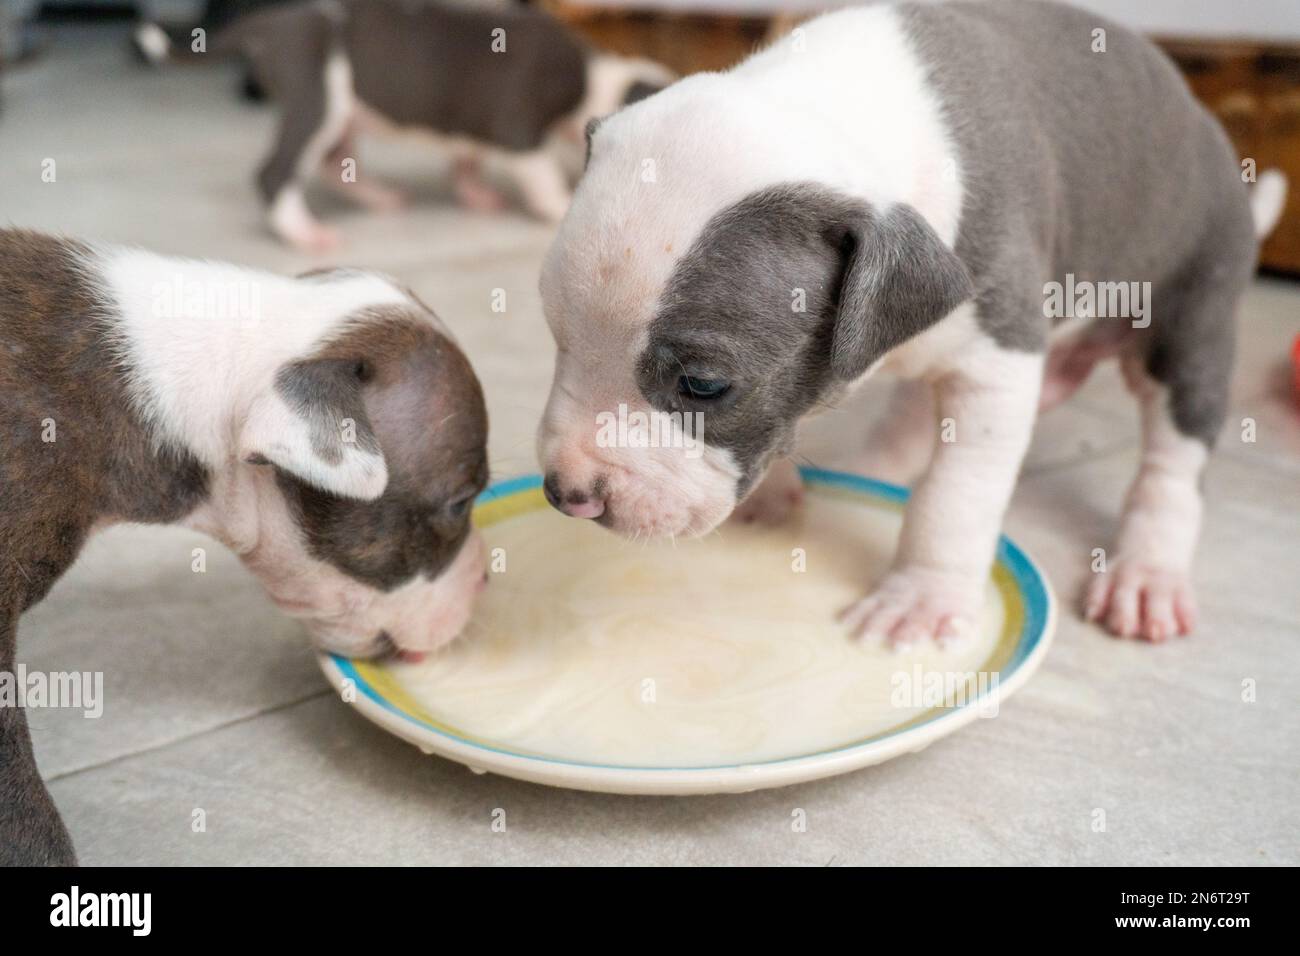 Puppy pit bull drinking milk from a plate Stock Photo